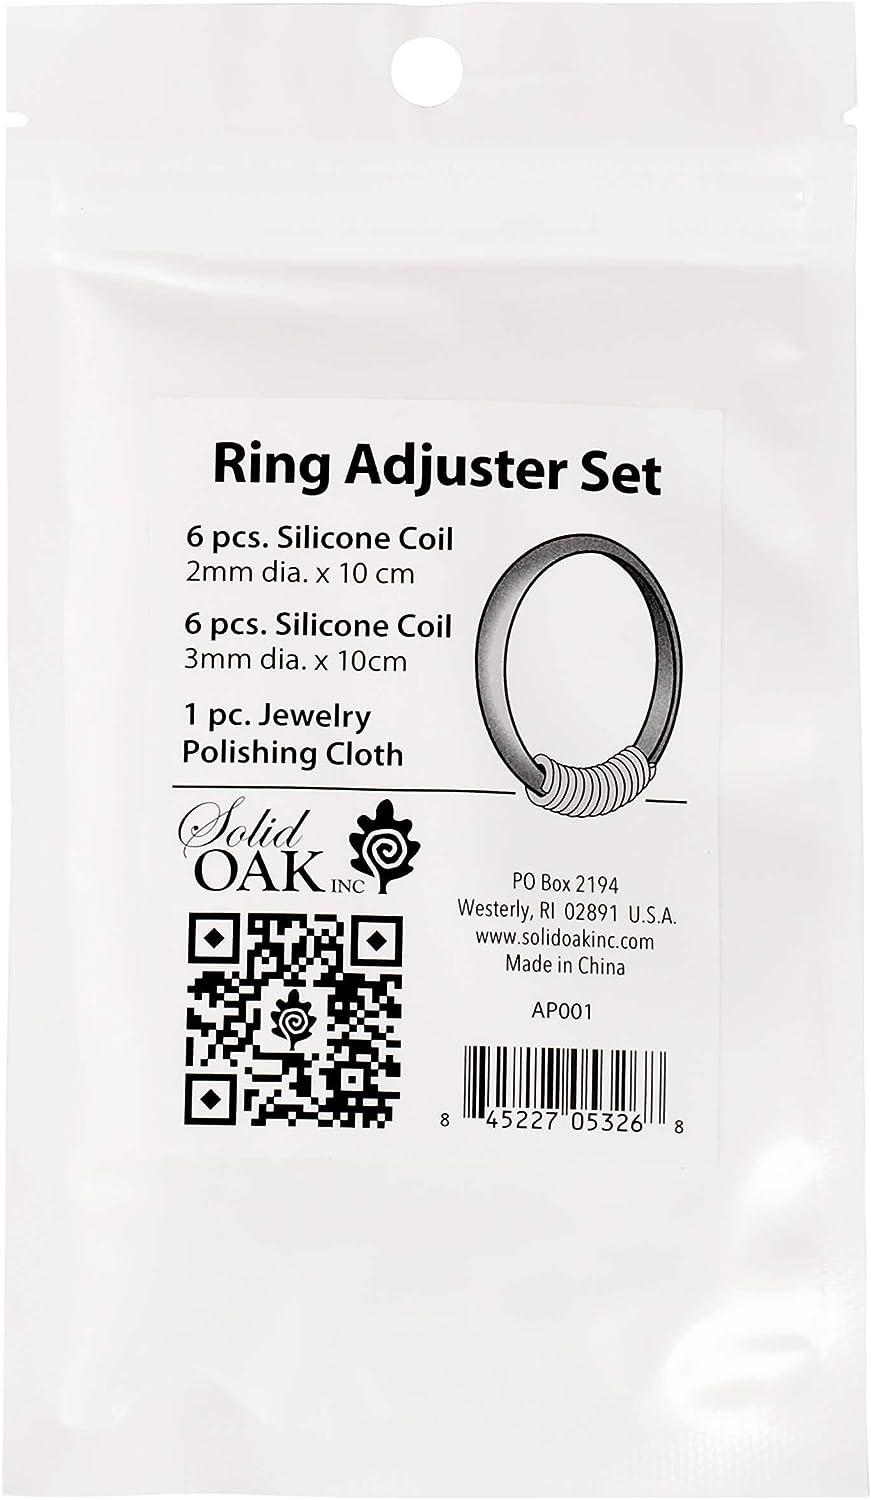 Ring Sizer Adjuster For Loose Rings - 12 Pack, 2 Sizes For